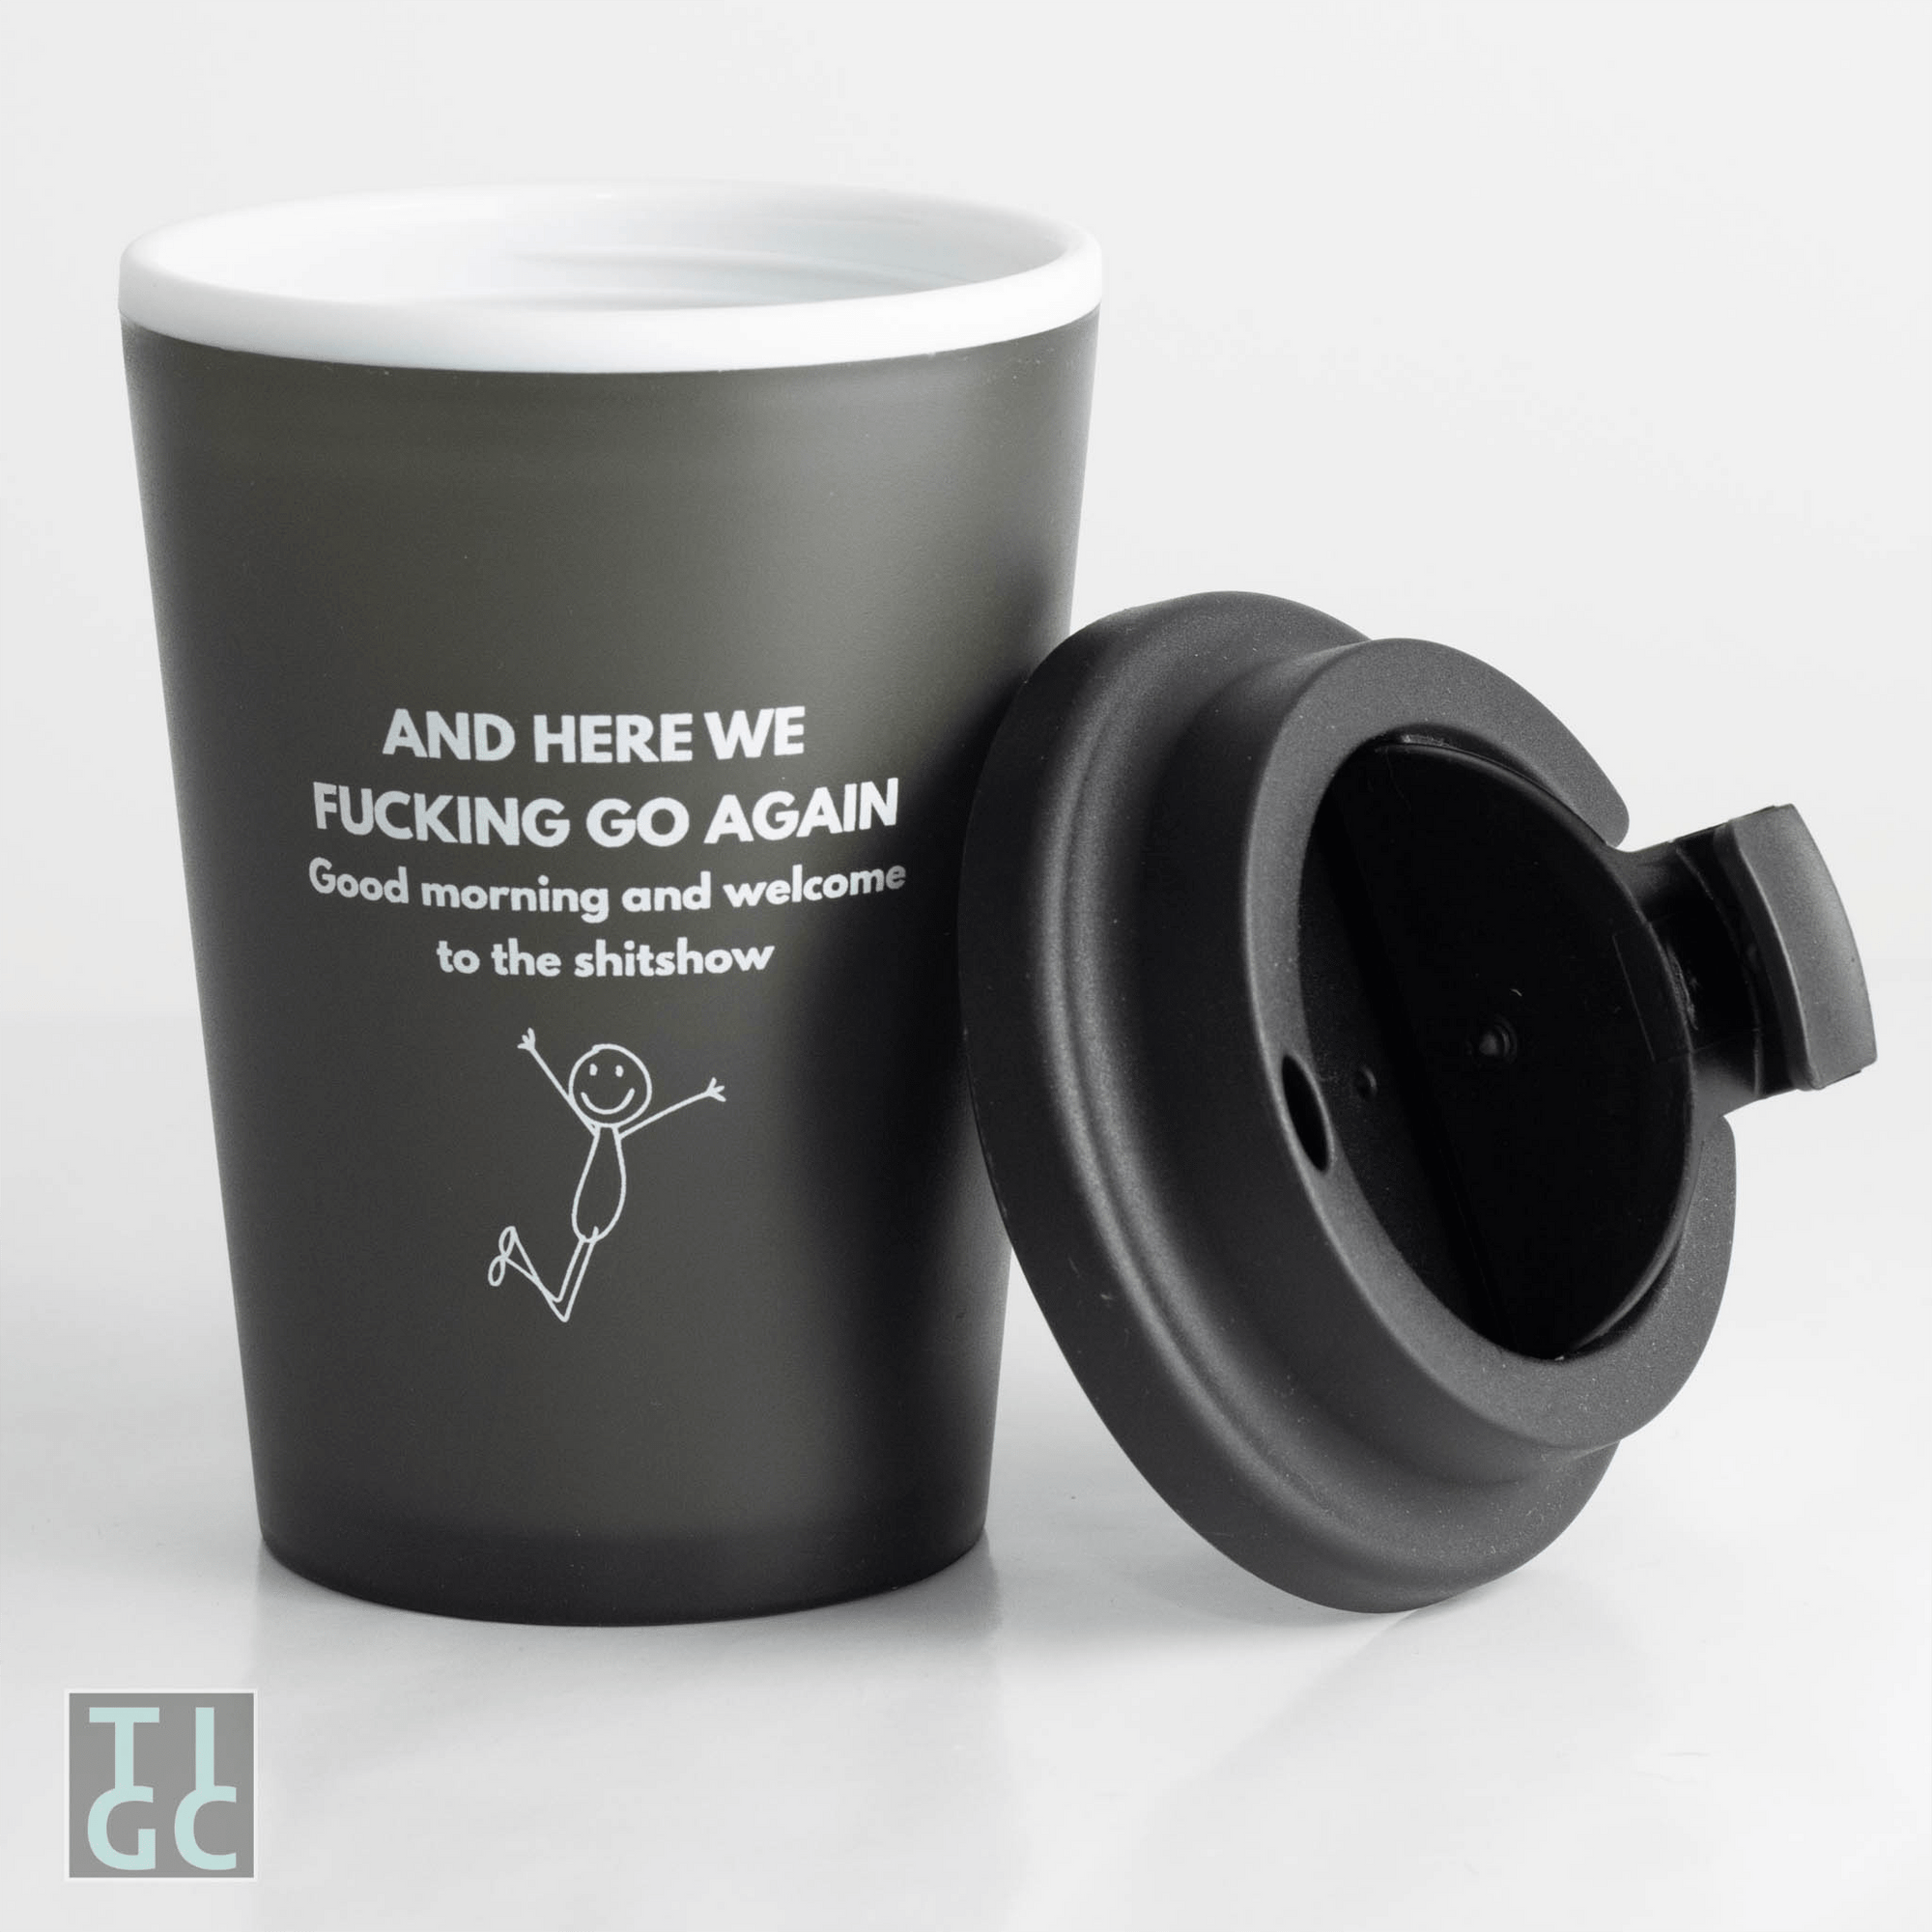 https://theinappropriategiftco.com/cdn/shop/files/tigc-the-inappropriate-gift-co-and-here-we-fucking-go-again-travel-mug-30610103140394_2000x.png?v=1691474260